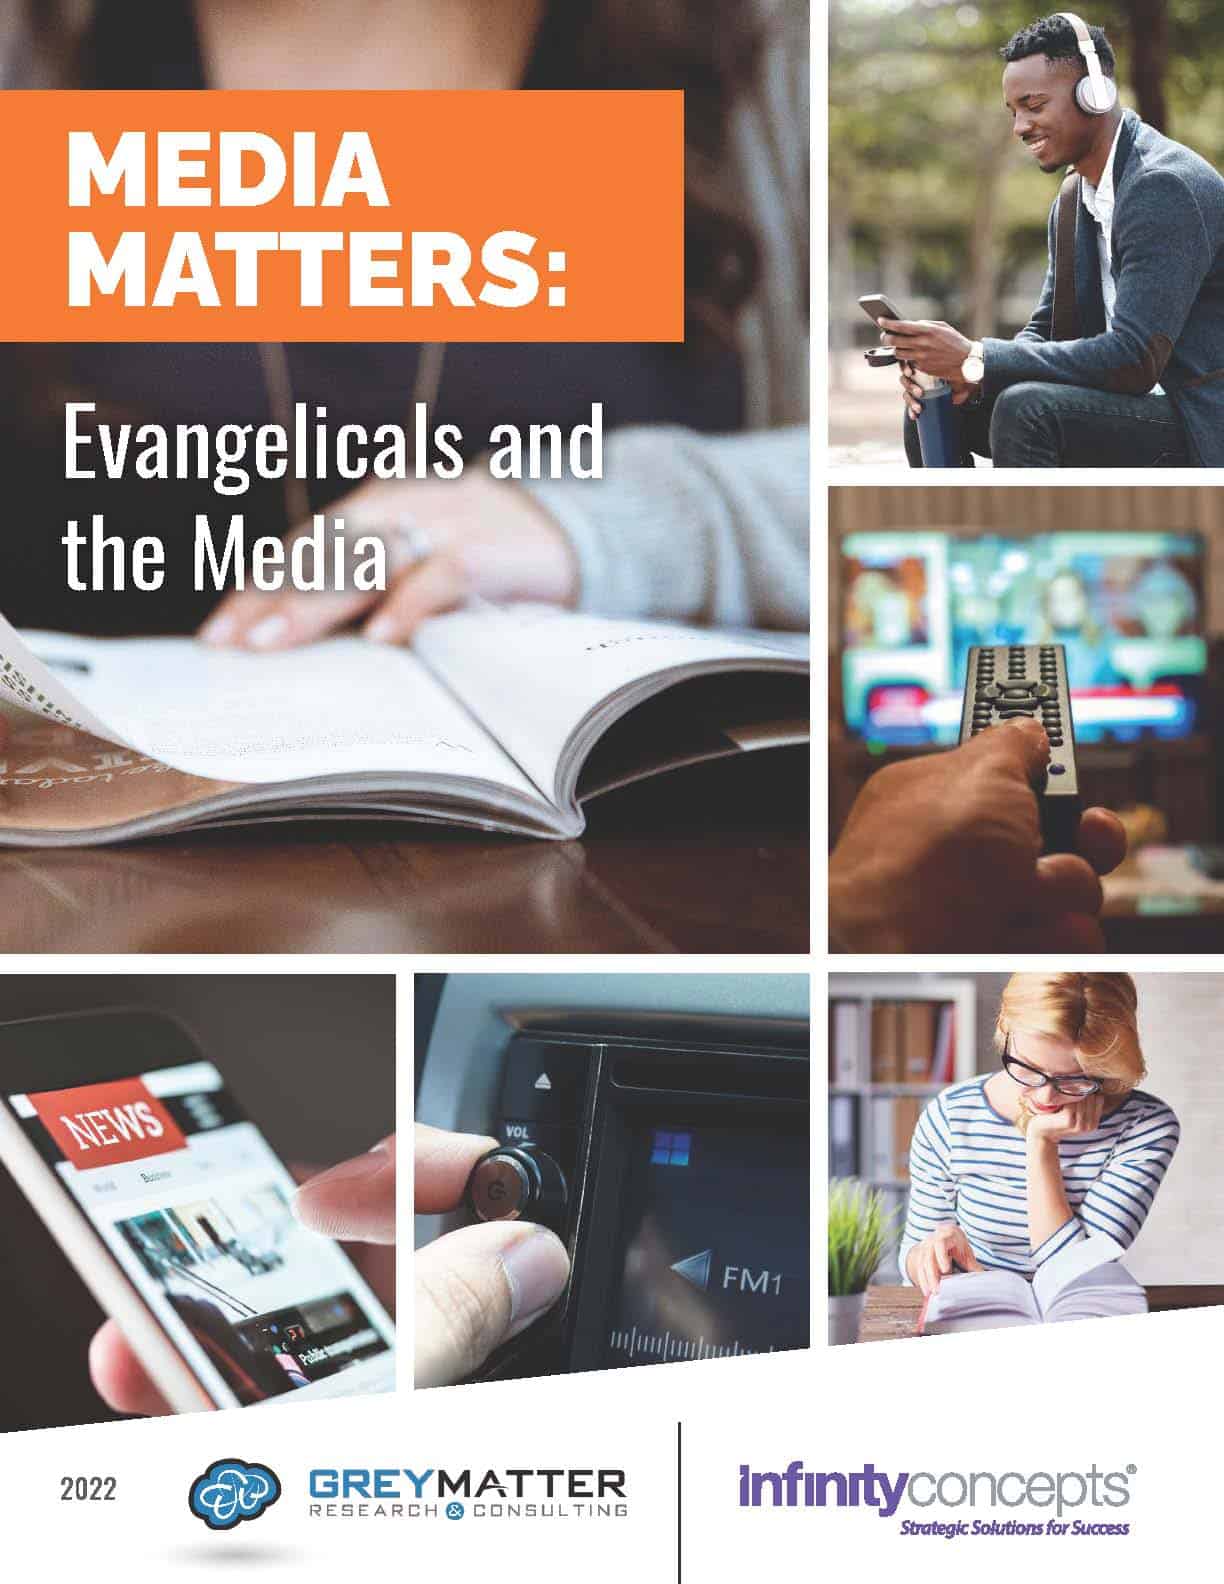 Report on Evangelicals and Christian Media